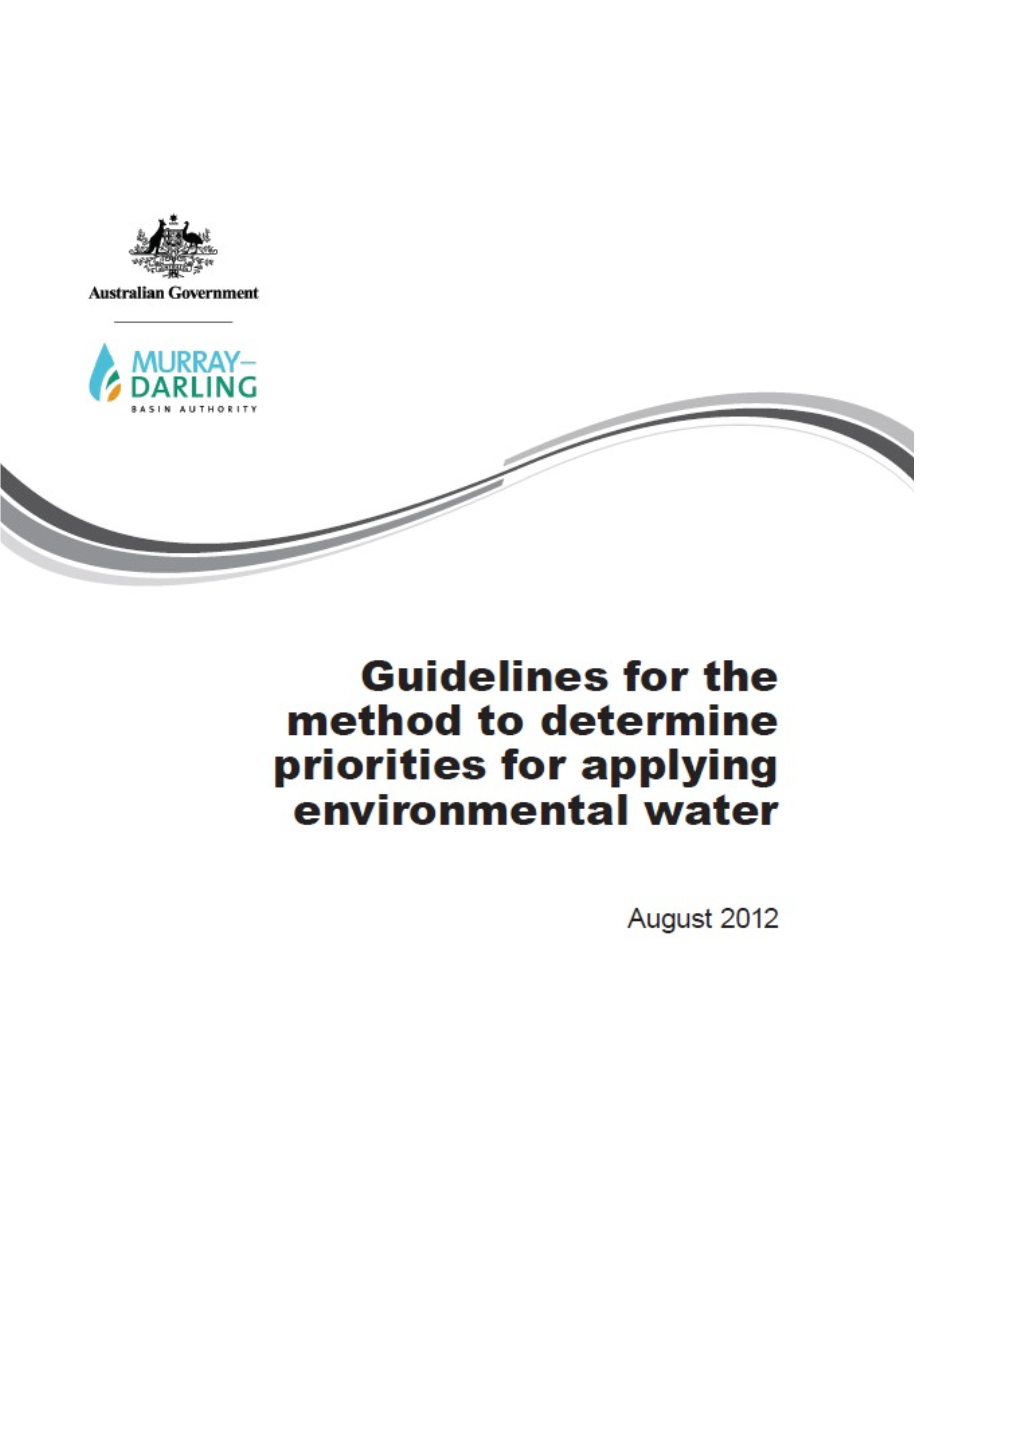 Guidelines for the Method to Determine Priorities for Applying Environmental Water, August 2012